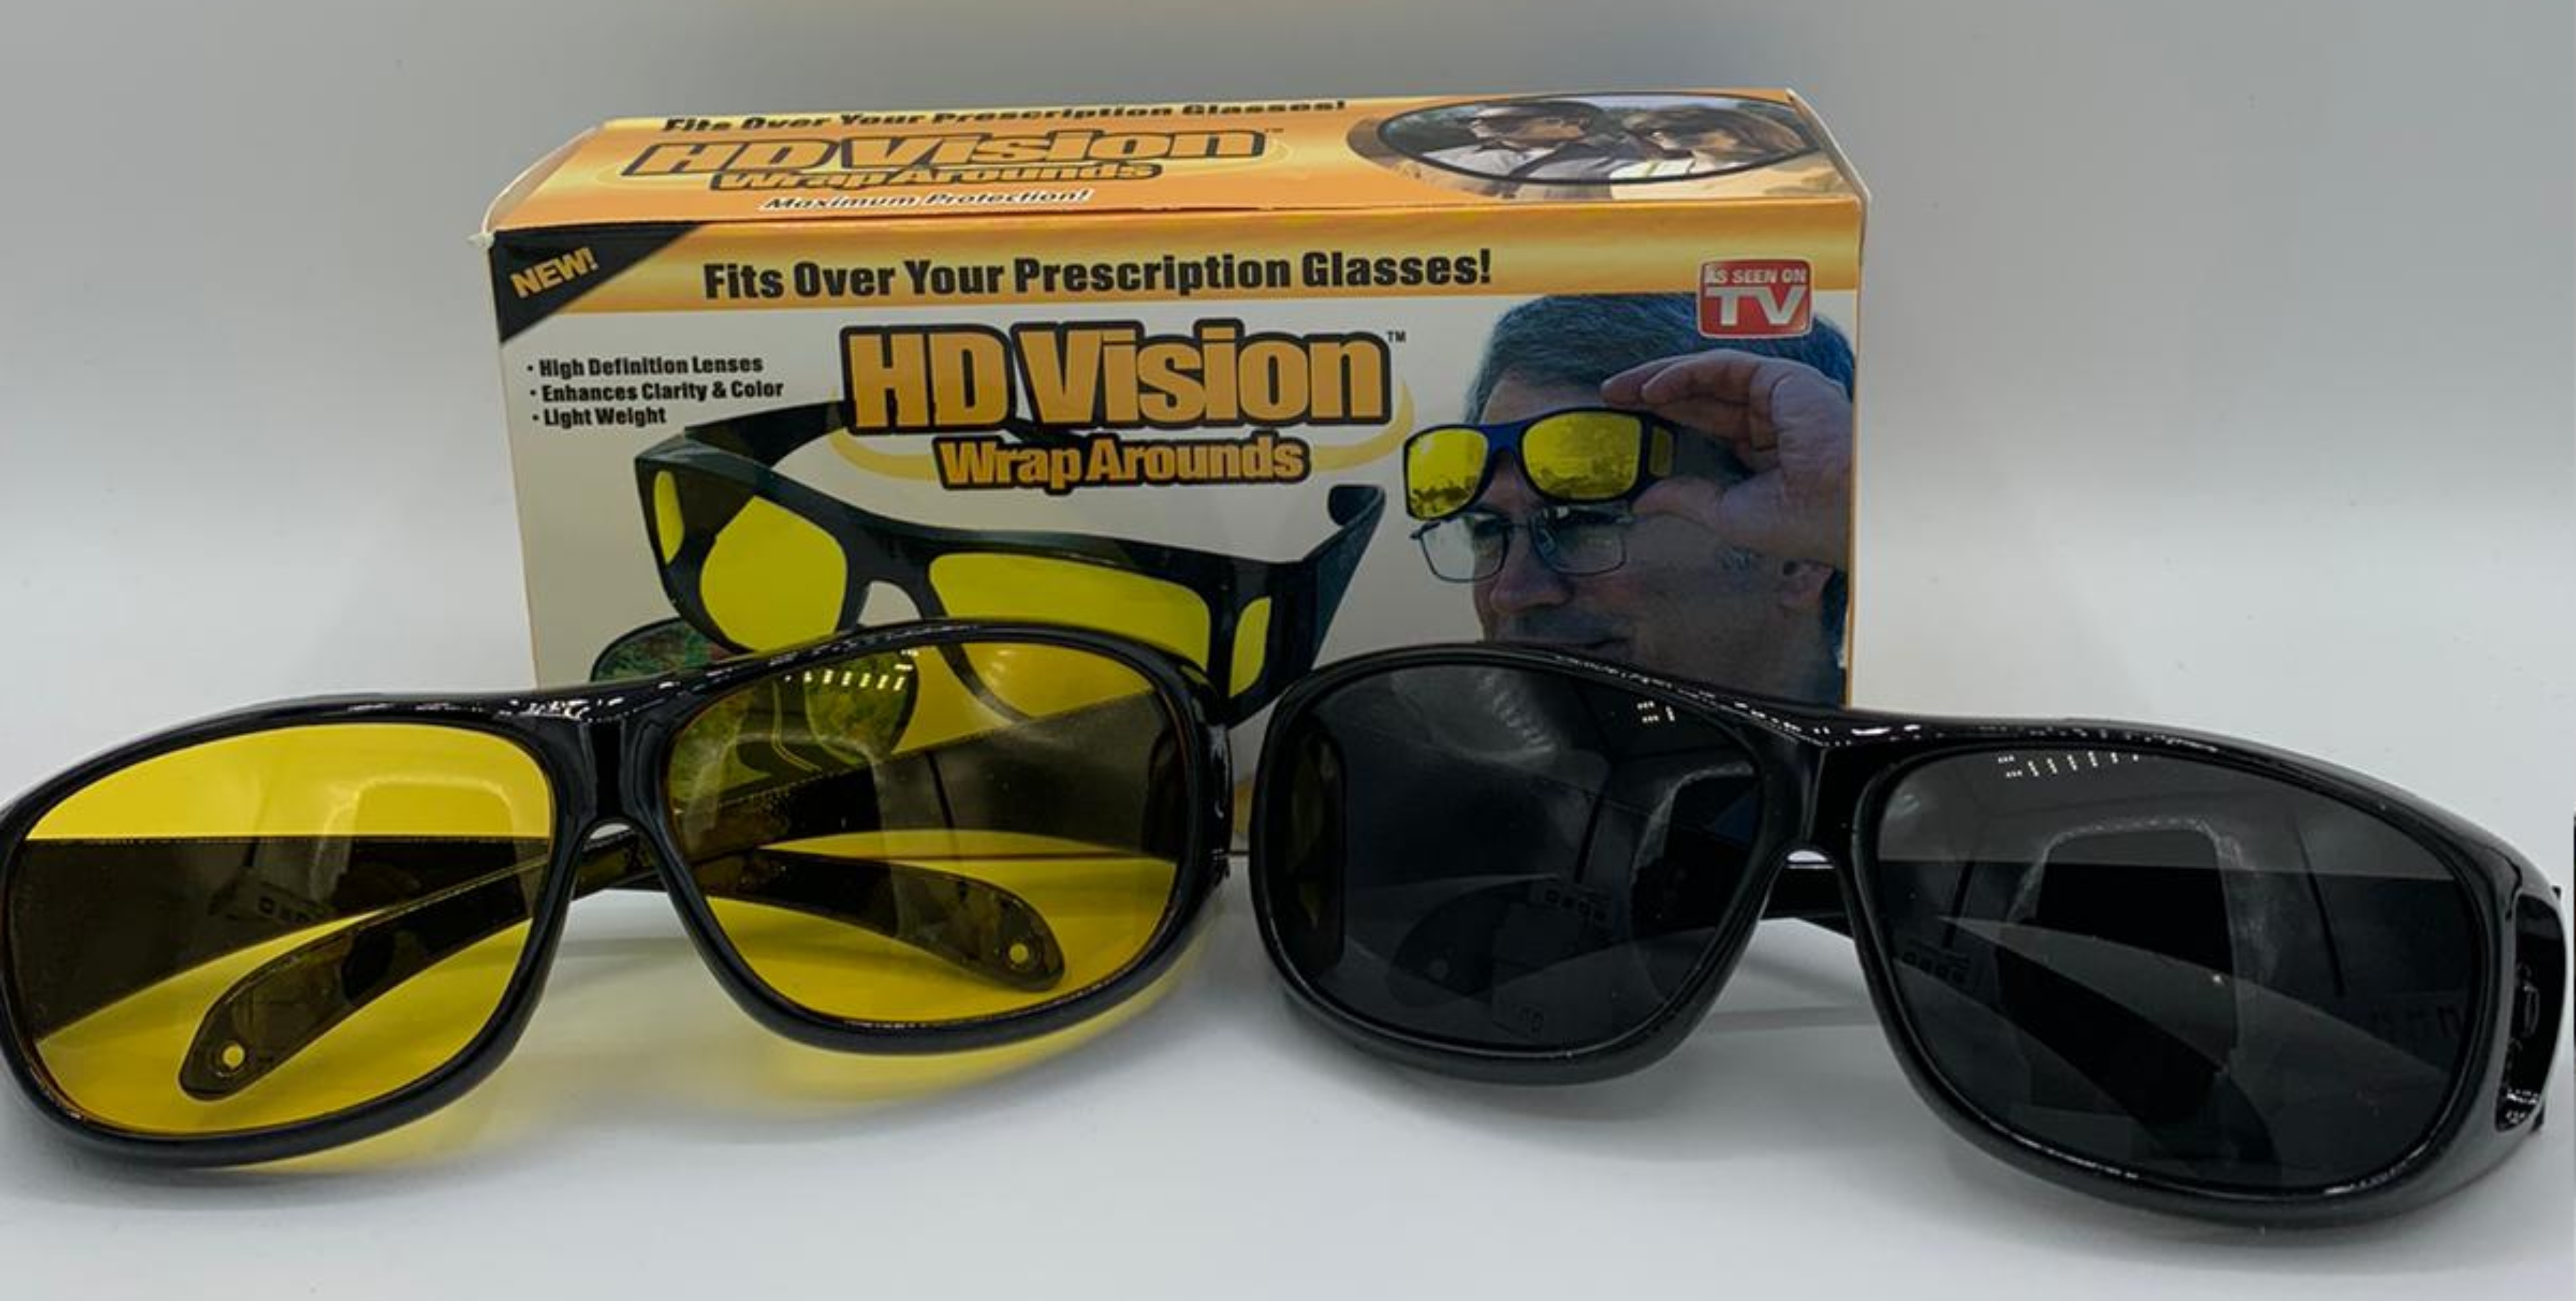 HD Night & Day Vision Wraparound Sunglasses, As Seen on TV, Fits over Glasses Bonus Pair Included - image 5 of 6